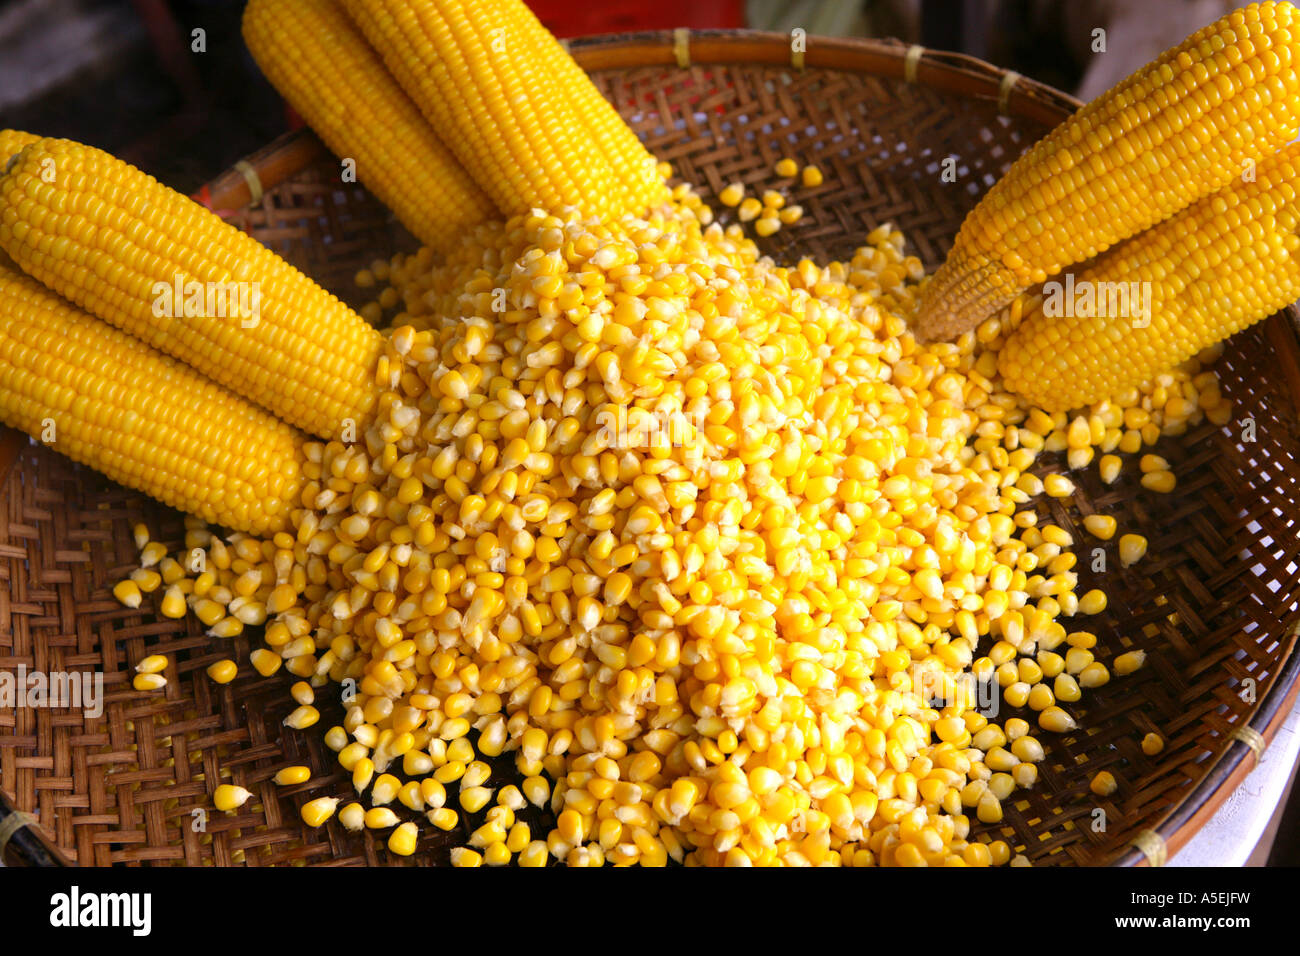 maize on market in Thailand Stock Photo